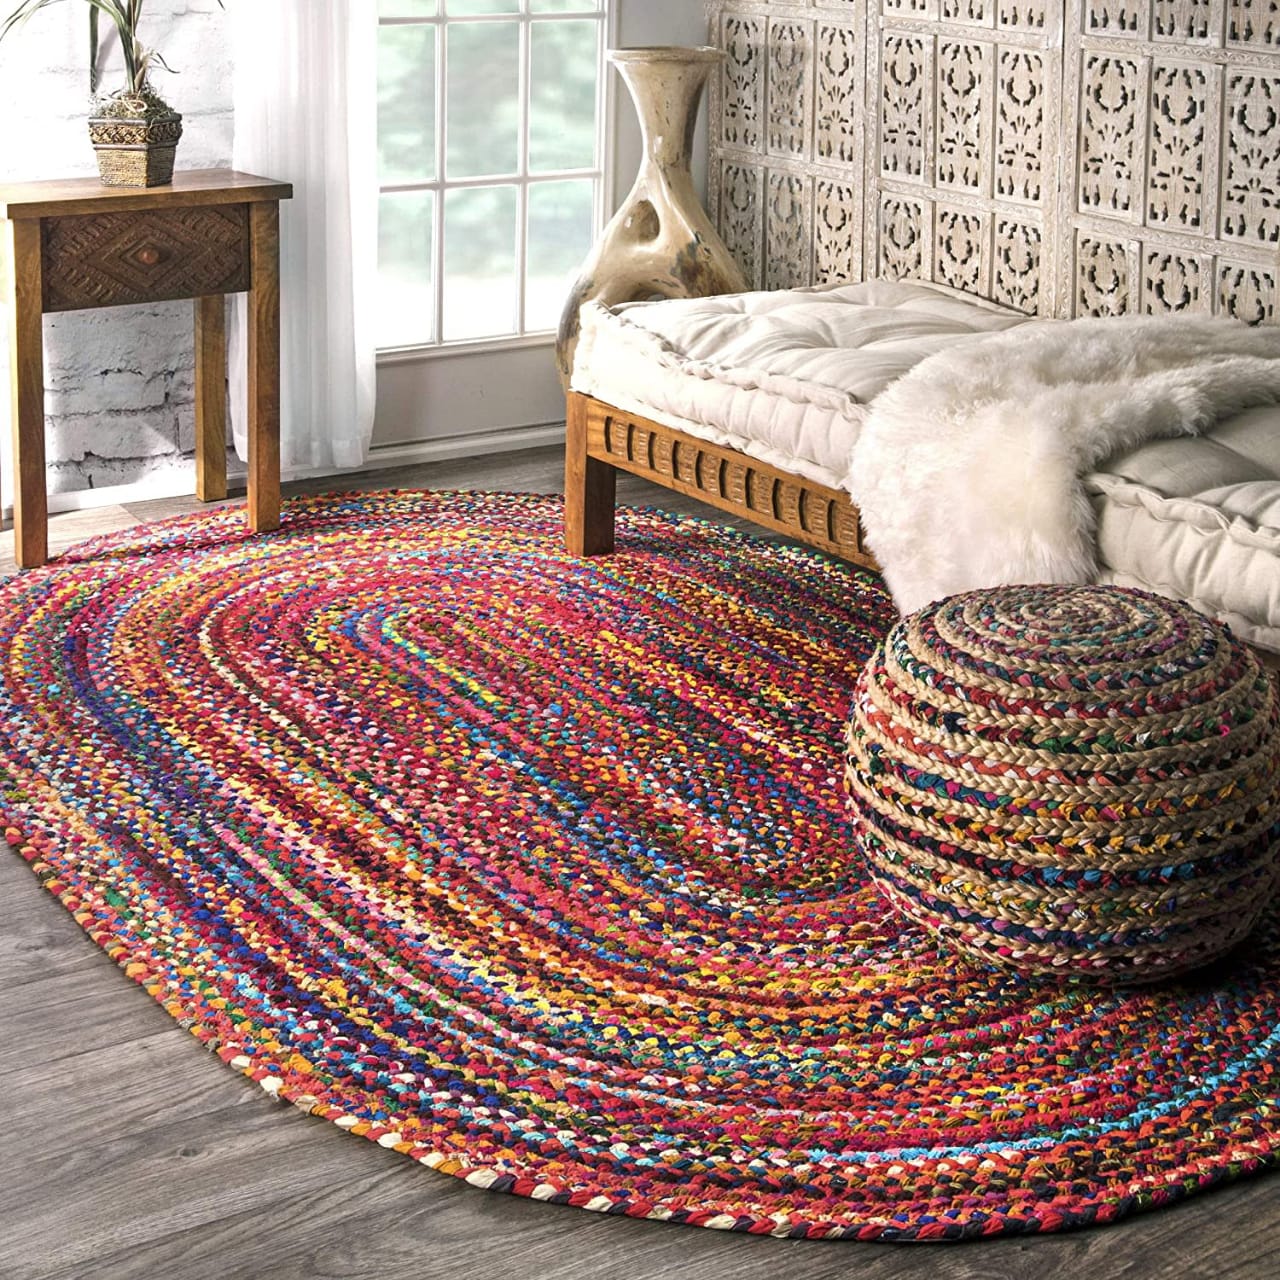 Kashyapa Rugs Collection-Cotton Chindi Oval Braided Area Rugs.